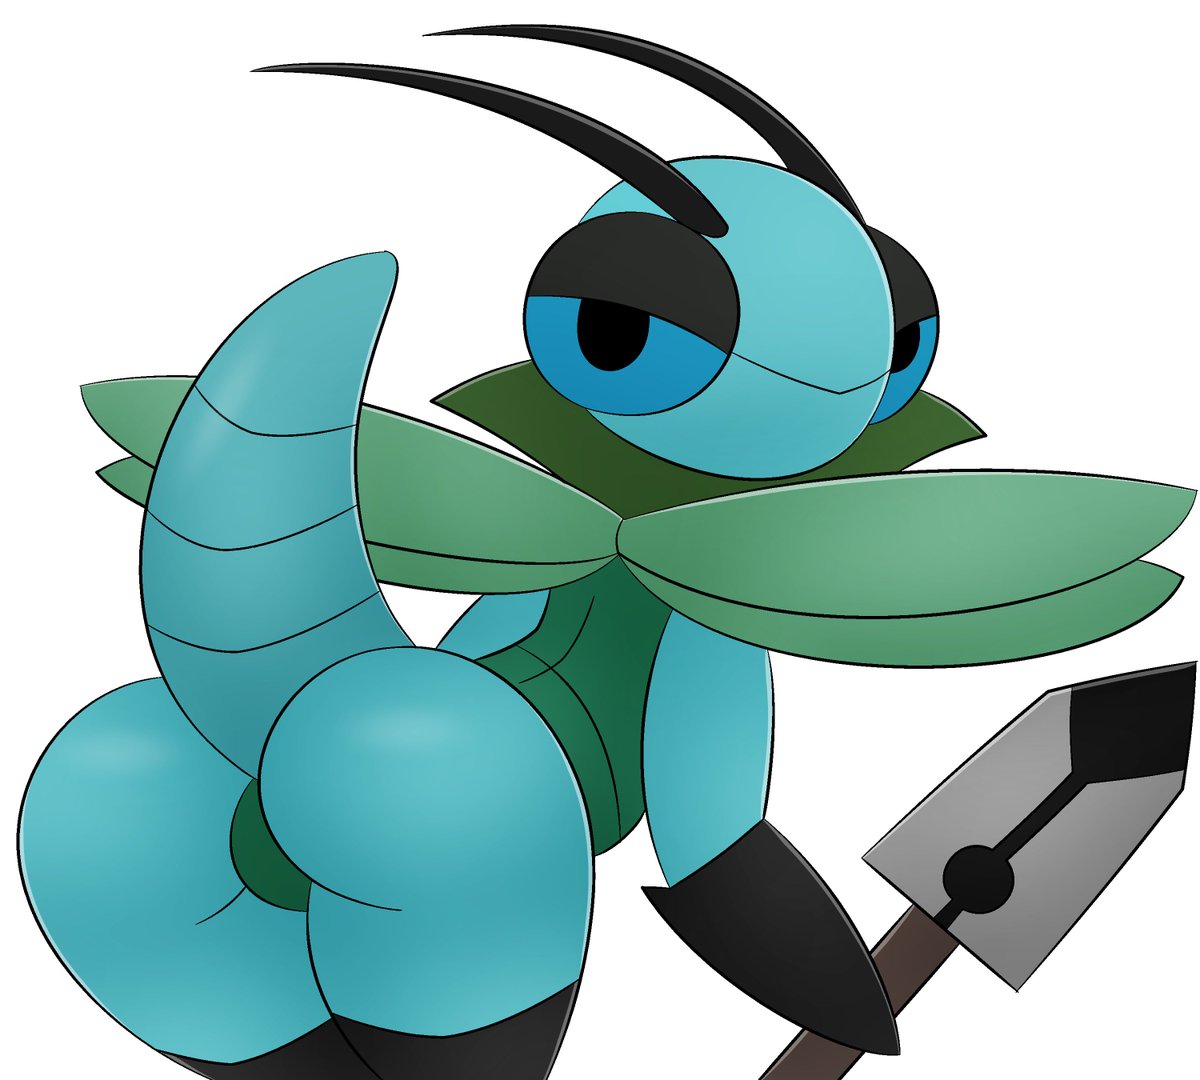 More Bug Fables art! drew the npc from chapter 5.Cute dragonfly butt! 